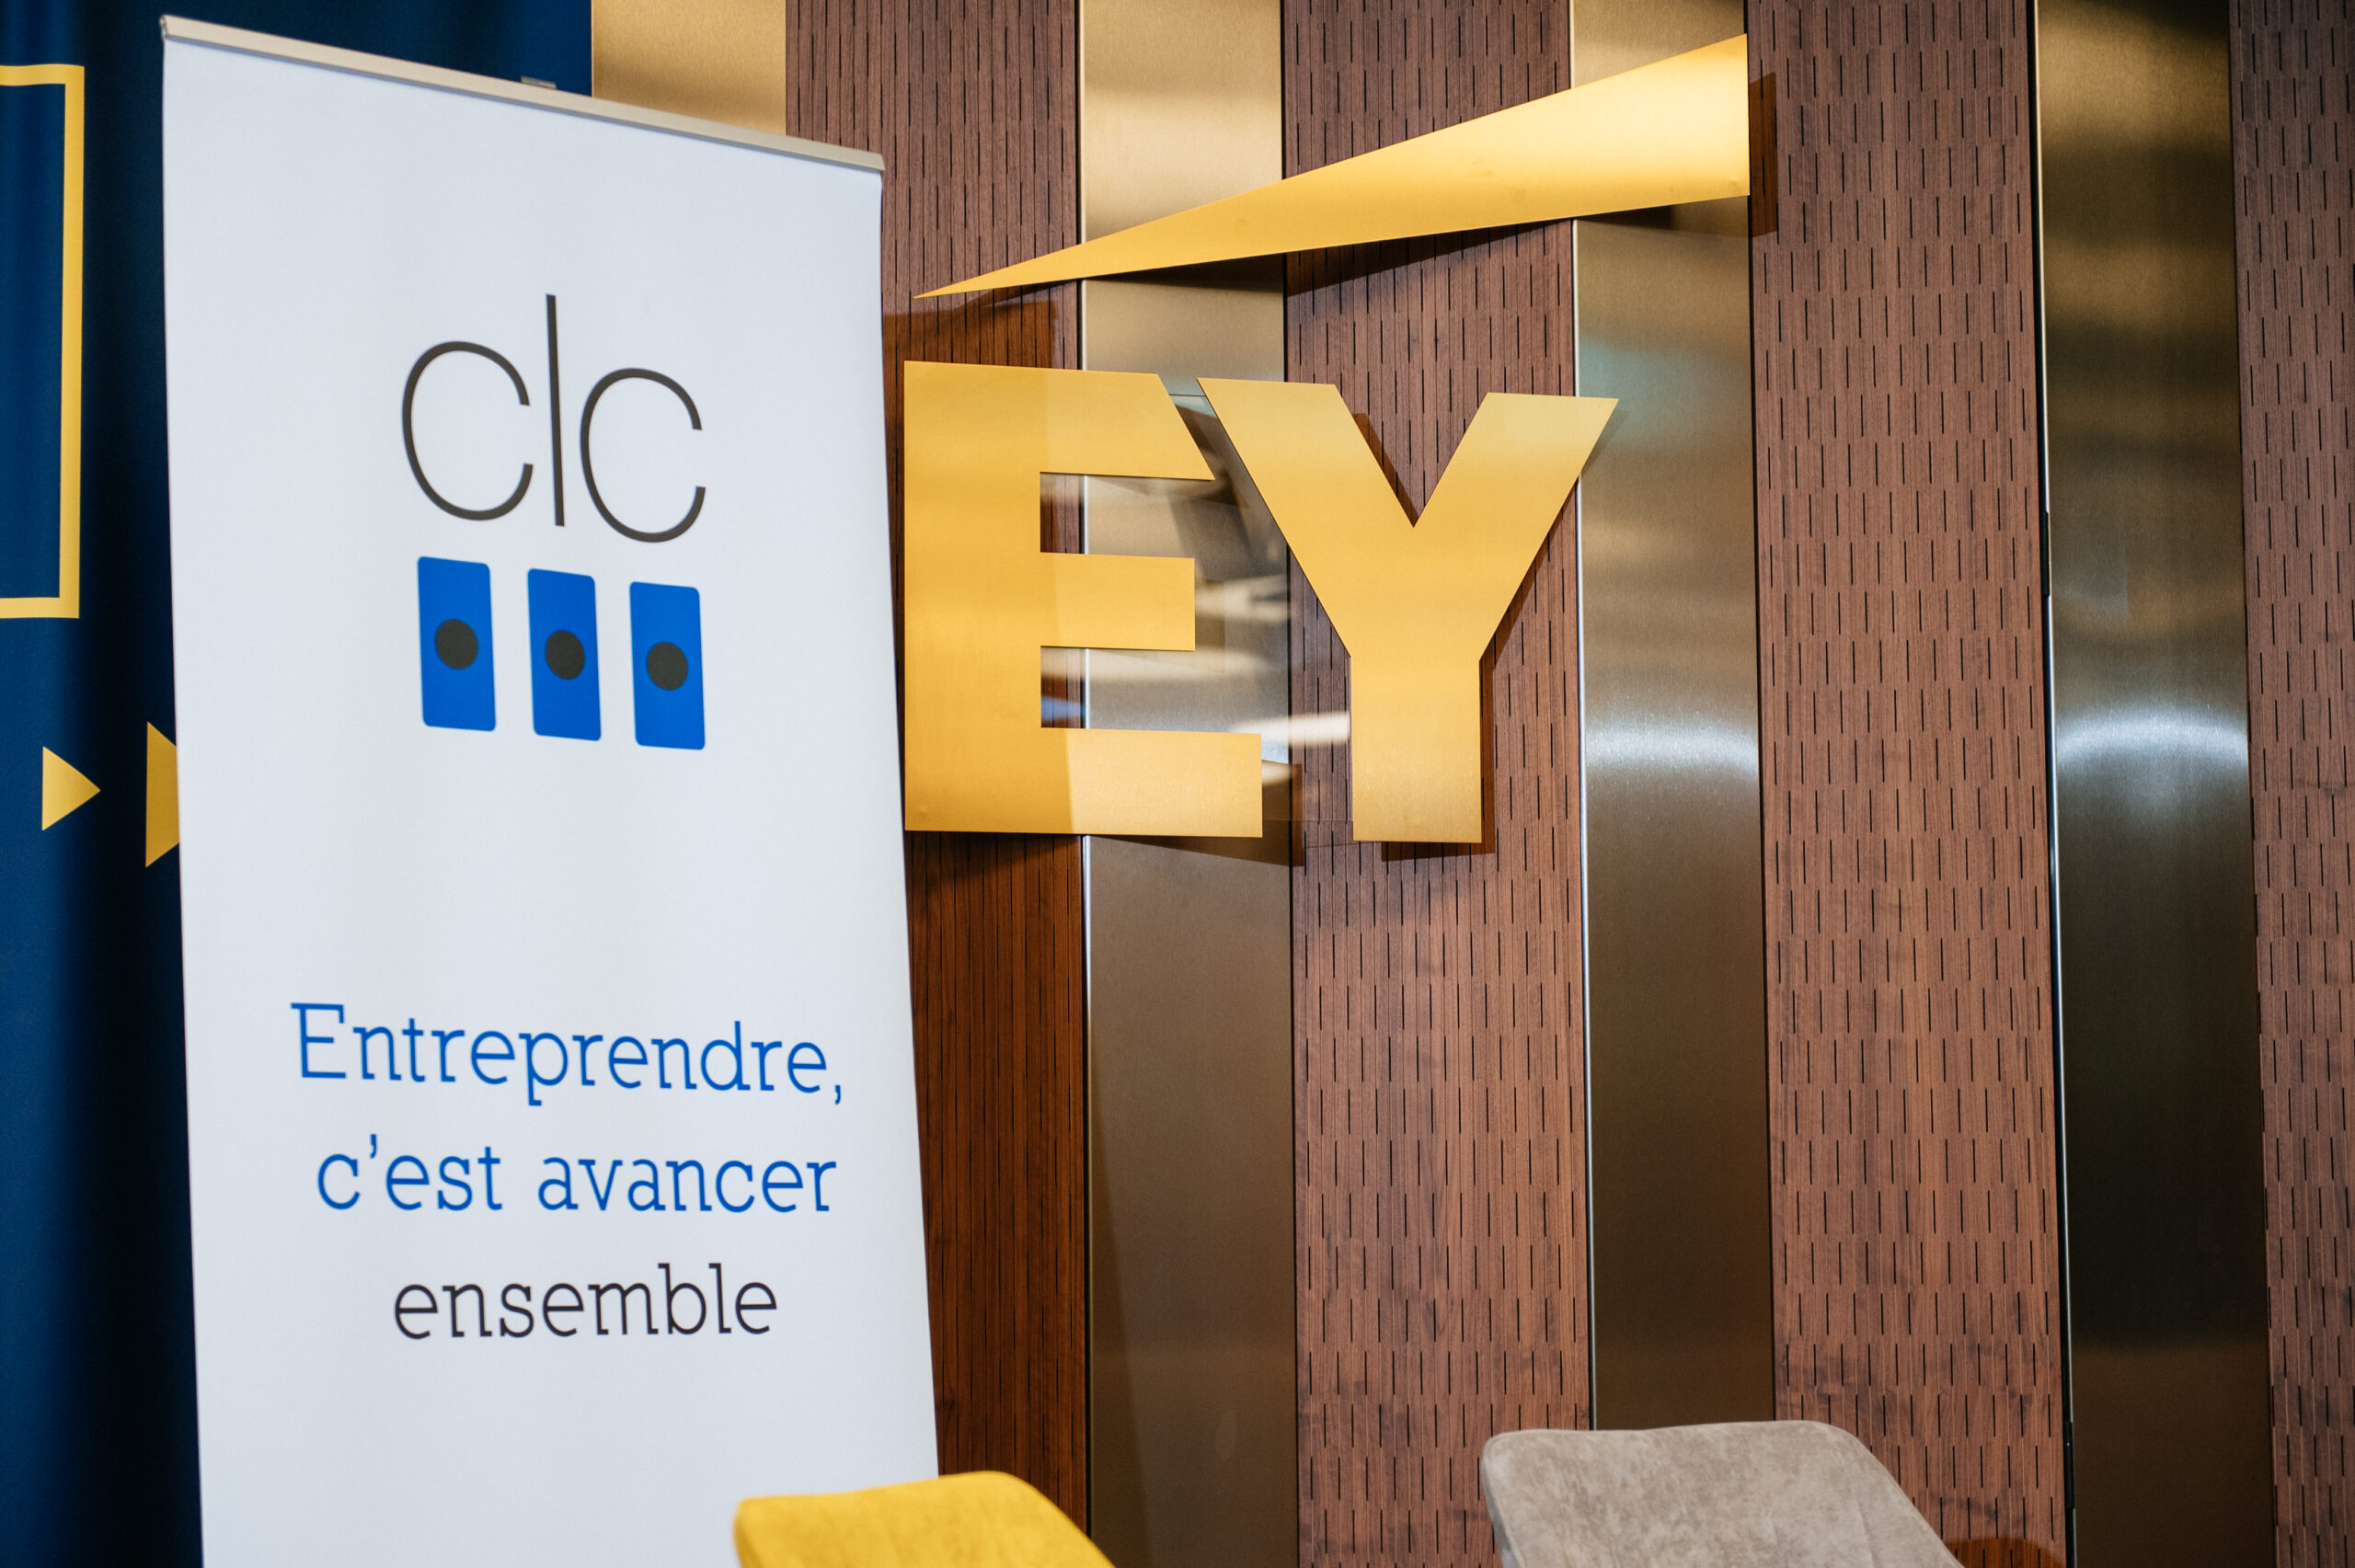 Open Networking by clc & LDF @ EY Luxembourg